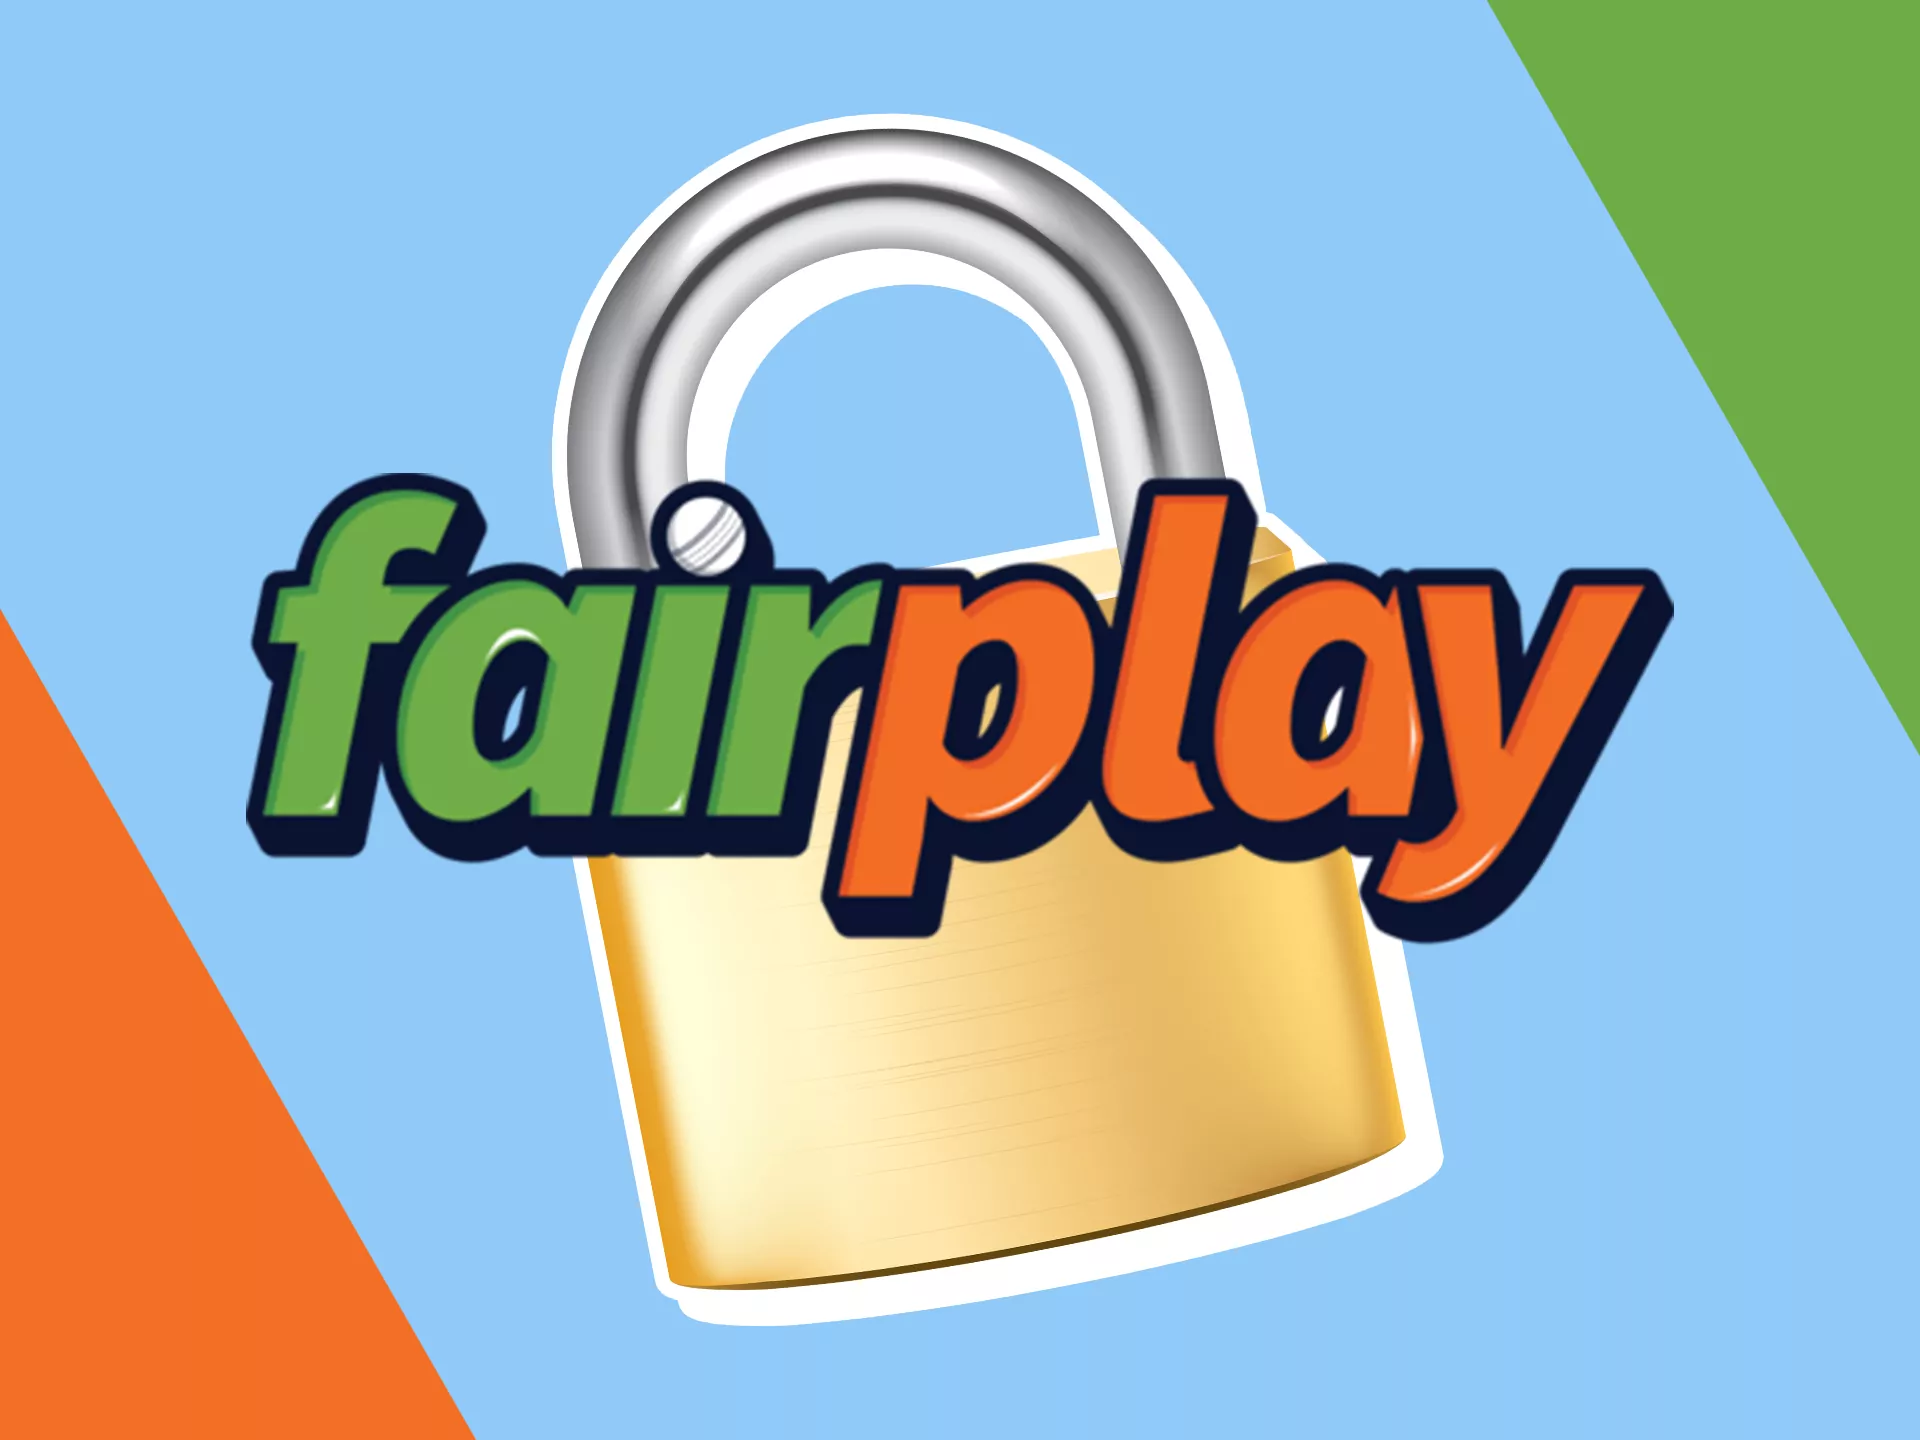 Fairplay has security for your information.